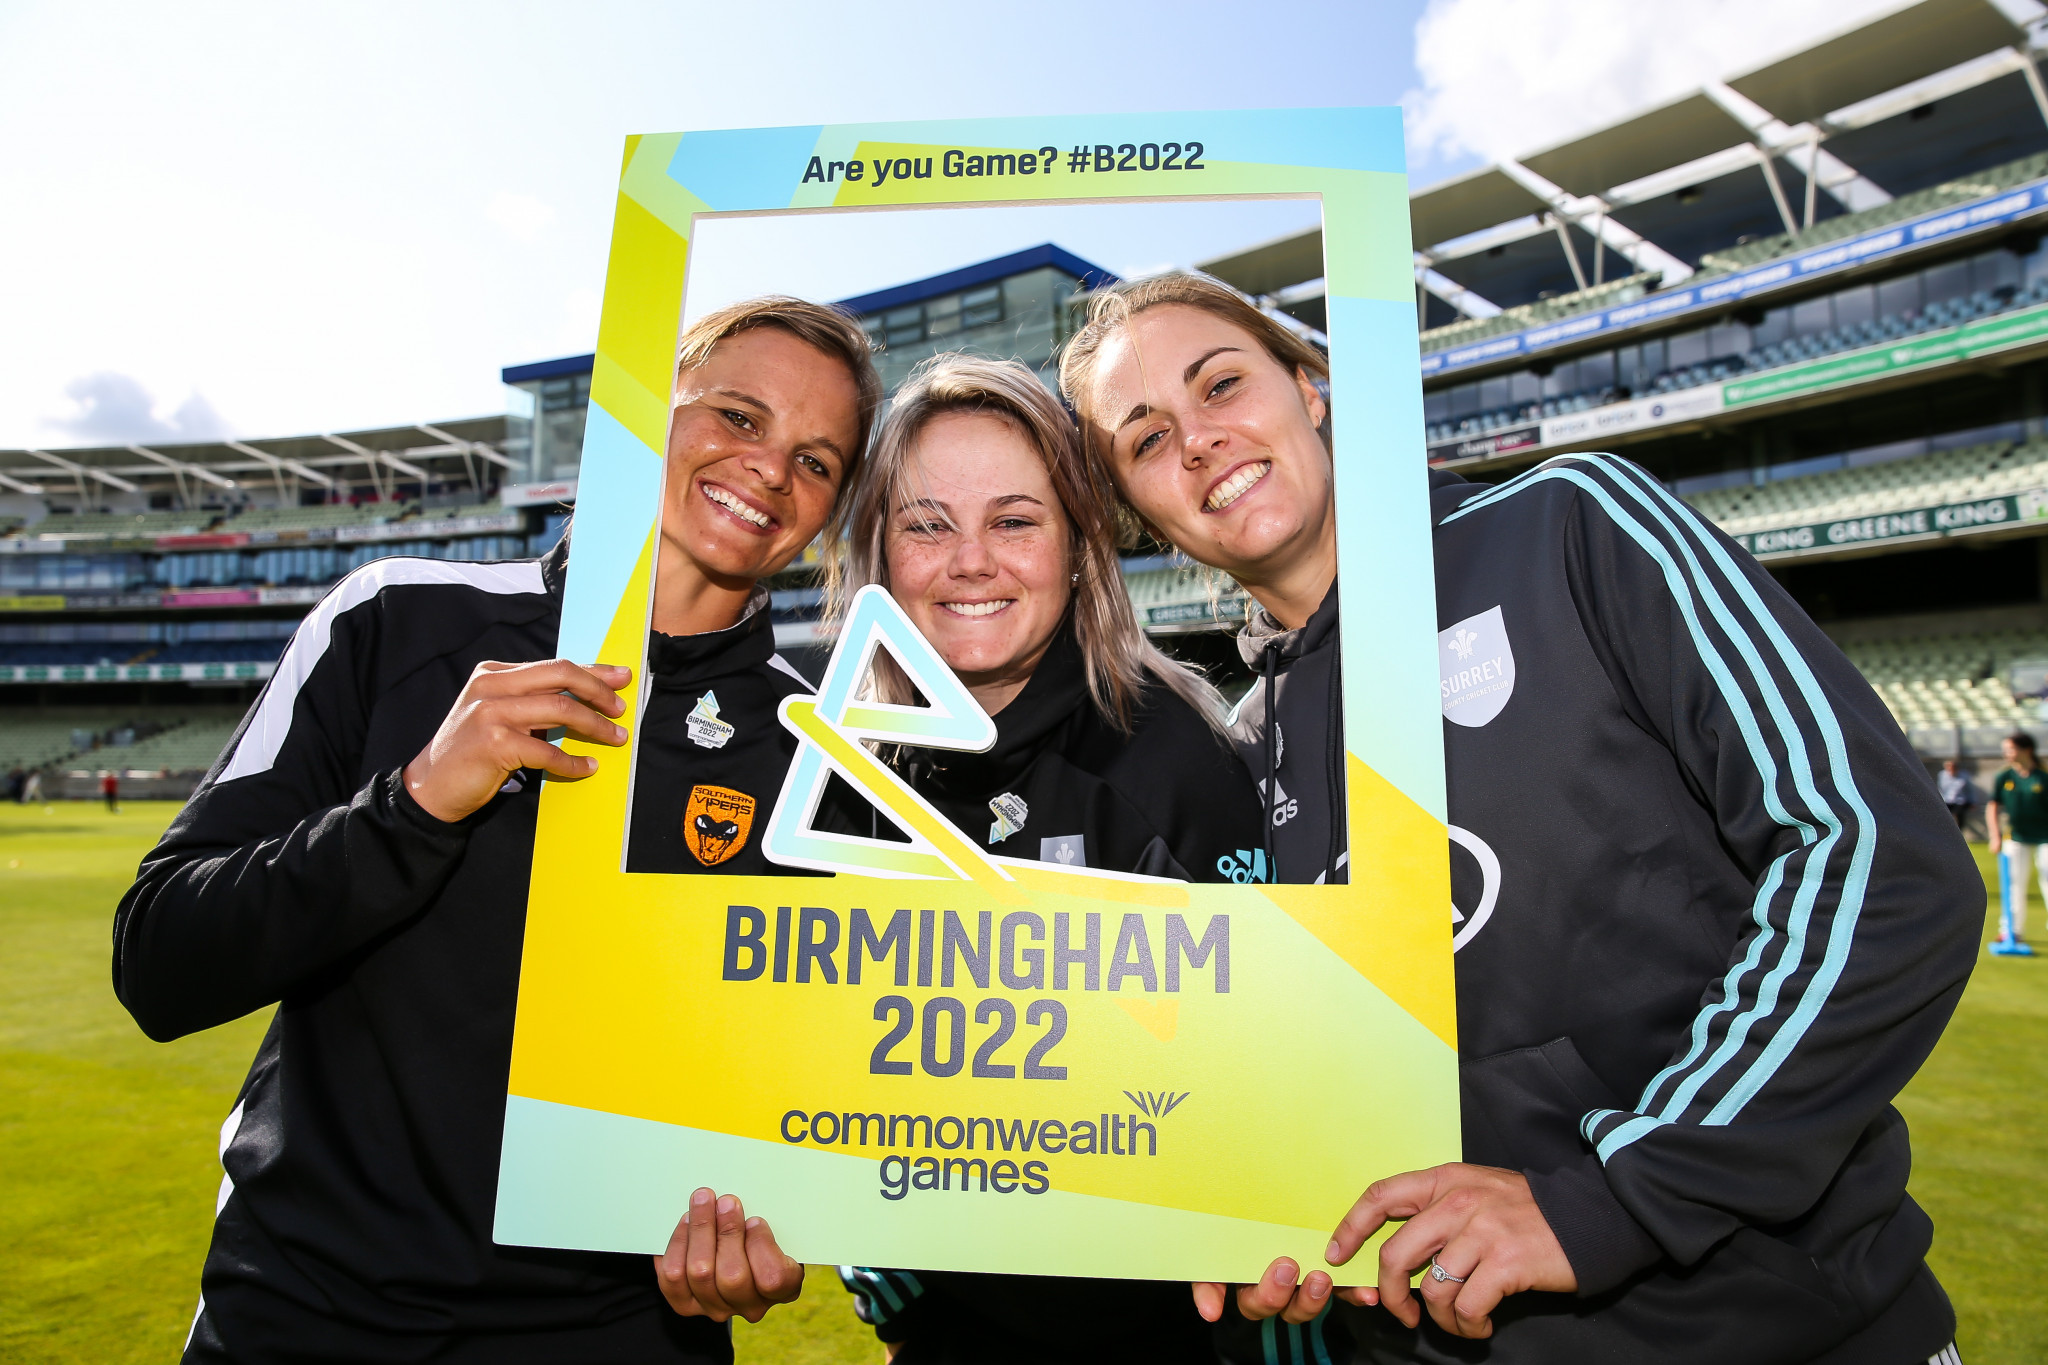 Women's T20 cricket will make its Commonwealth Games debut at Birmingham 2022 ©Getty Images